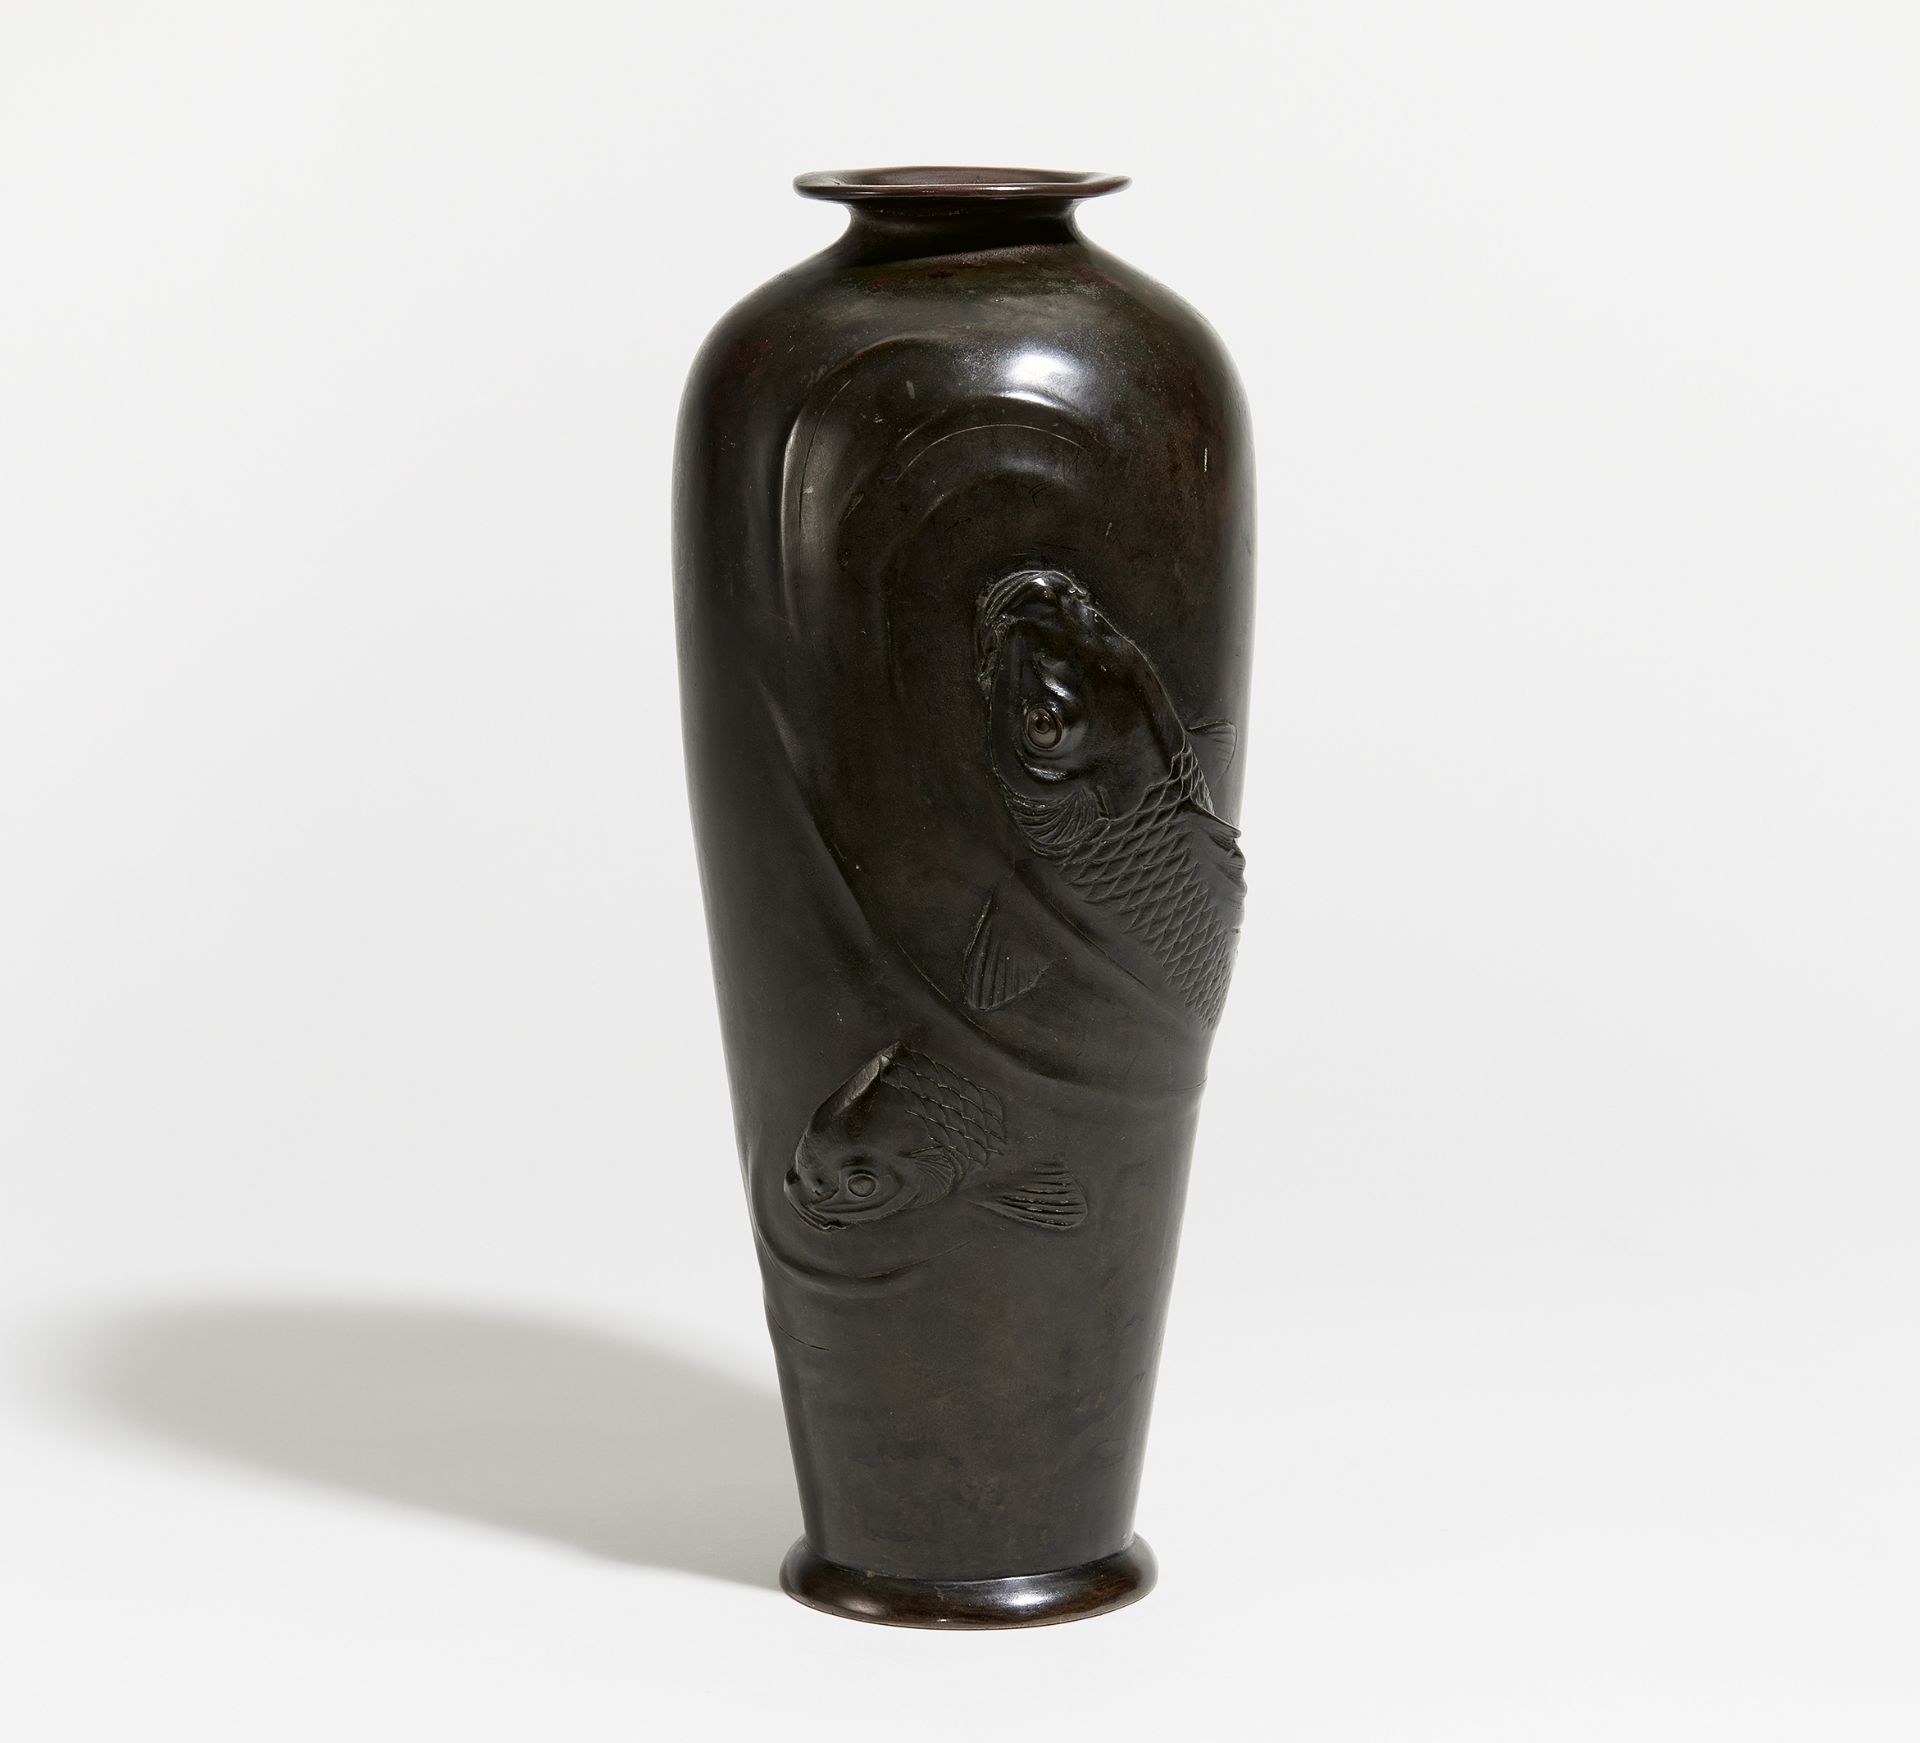 VASE WITH TWO LARGE CARPS. Japan. Meiji period (1868-1912). Bronze with dark patina. Relief. Eyes